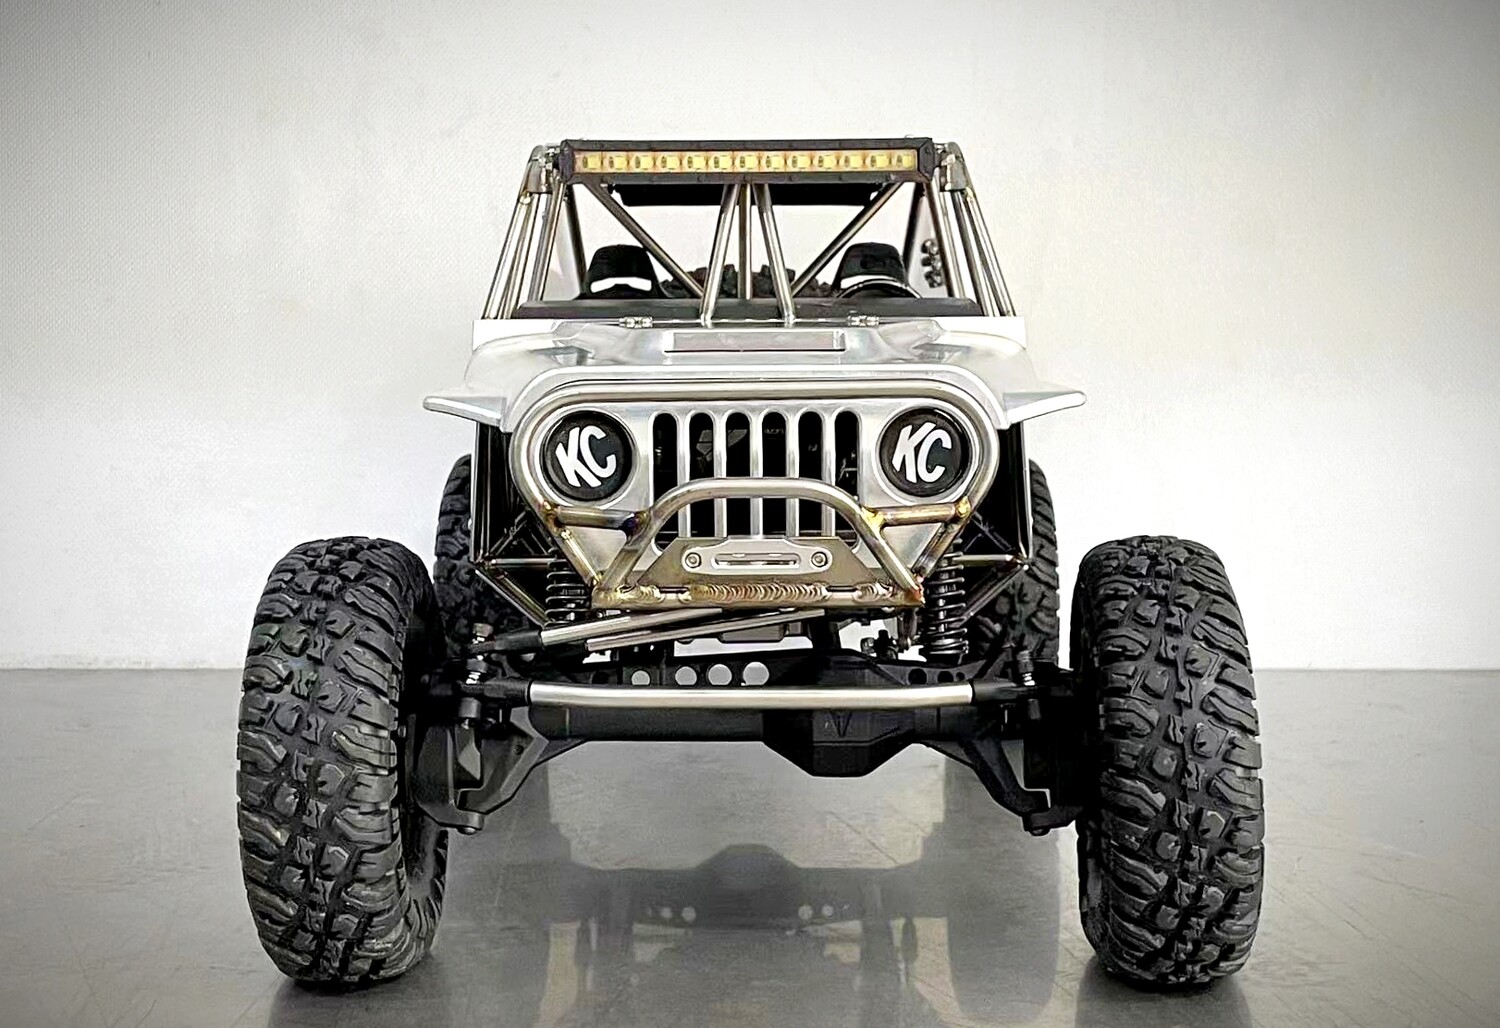 C3 Ultra 4 RC chassis for Vanquish, Axial and Traxxas platforms. Standard Set from USD499 (Deposit USD150)